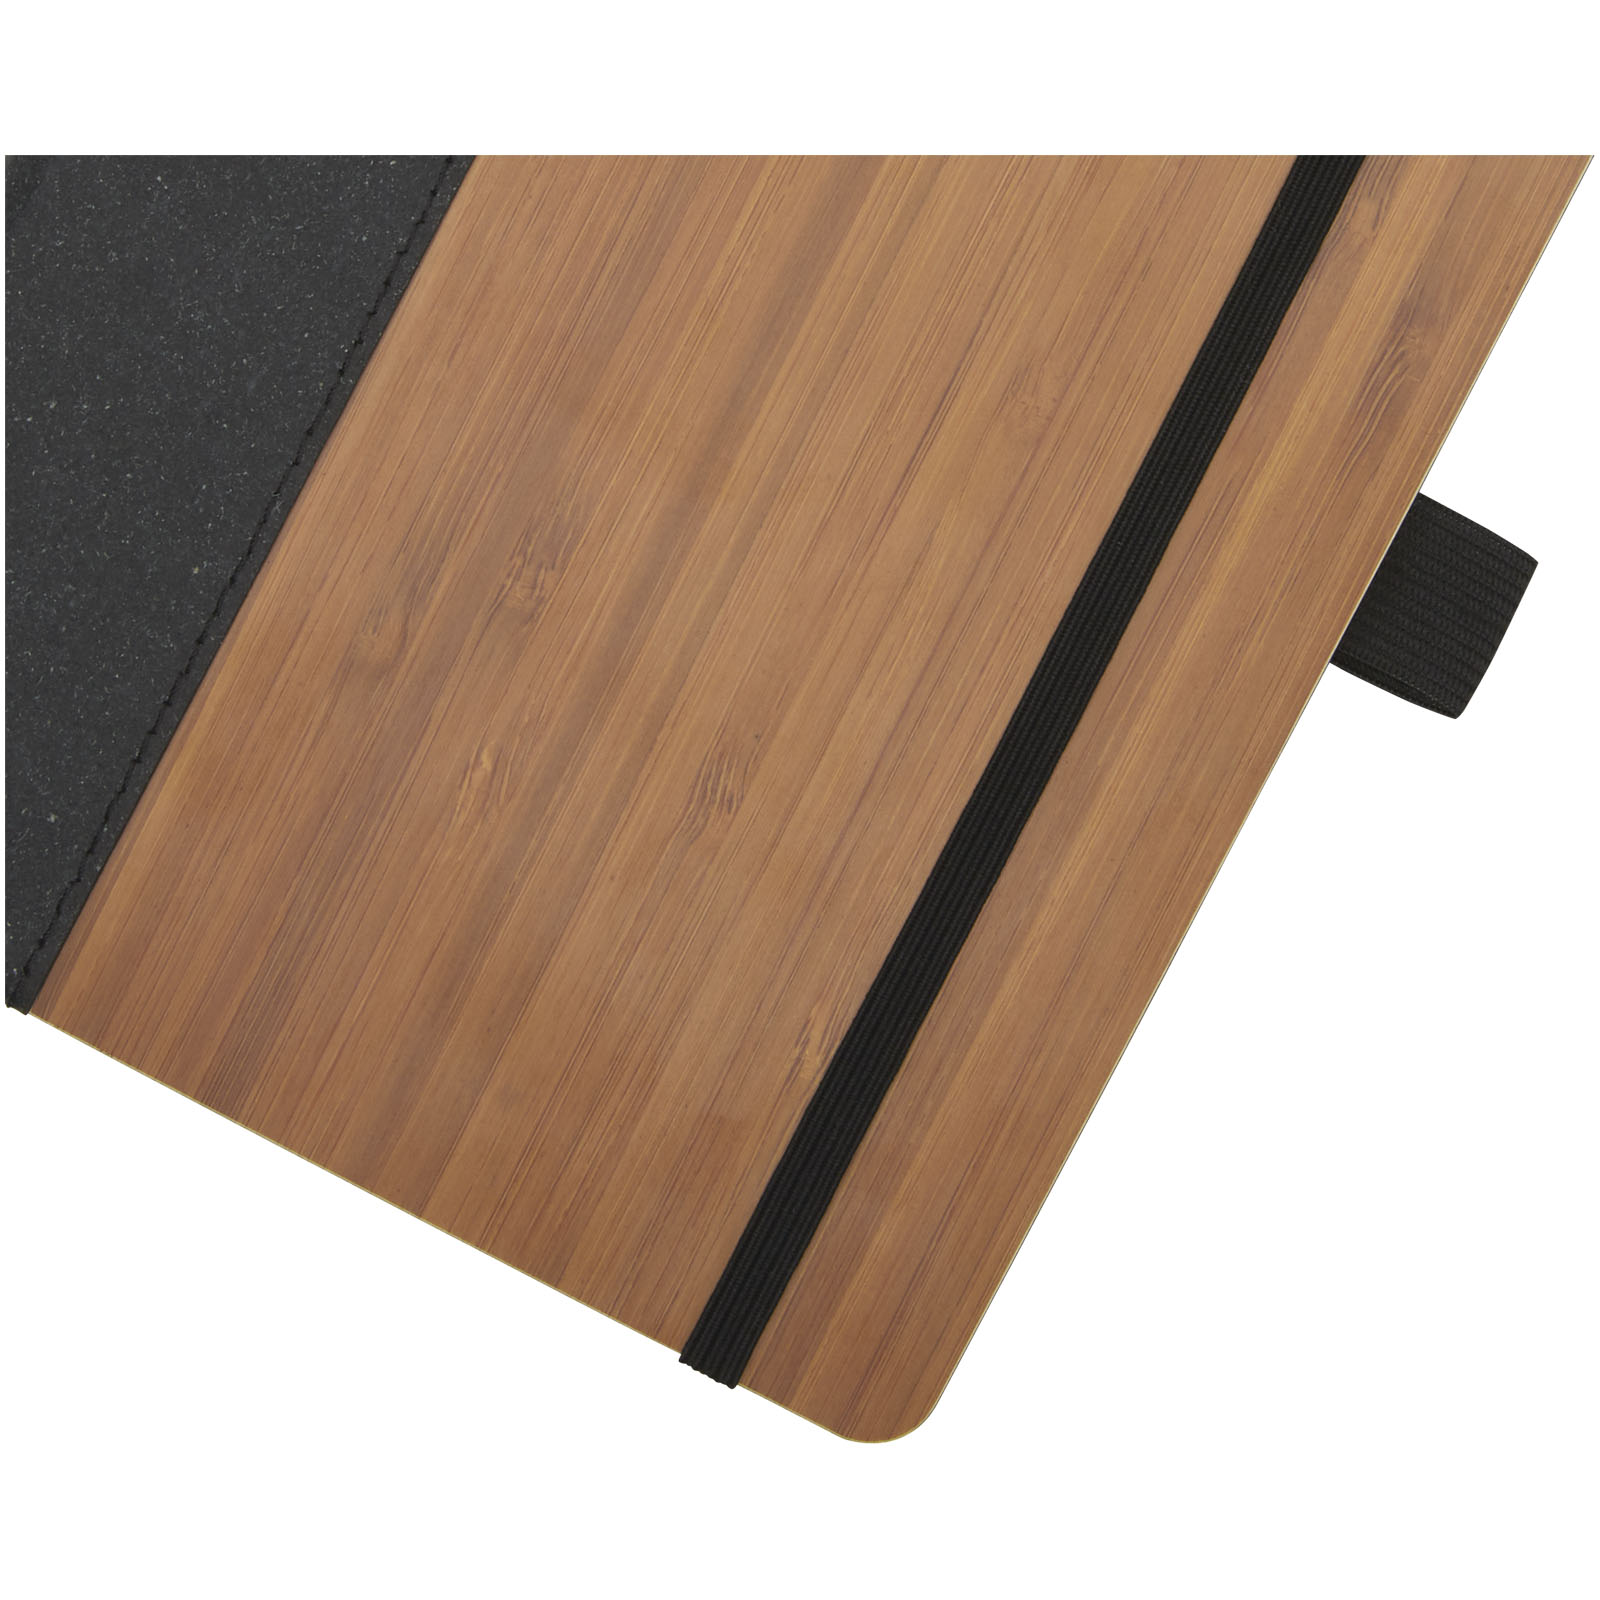 Advertising Hard cover notebooks - Note A5 bamboo notebook - 4